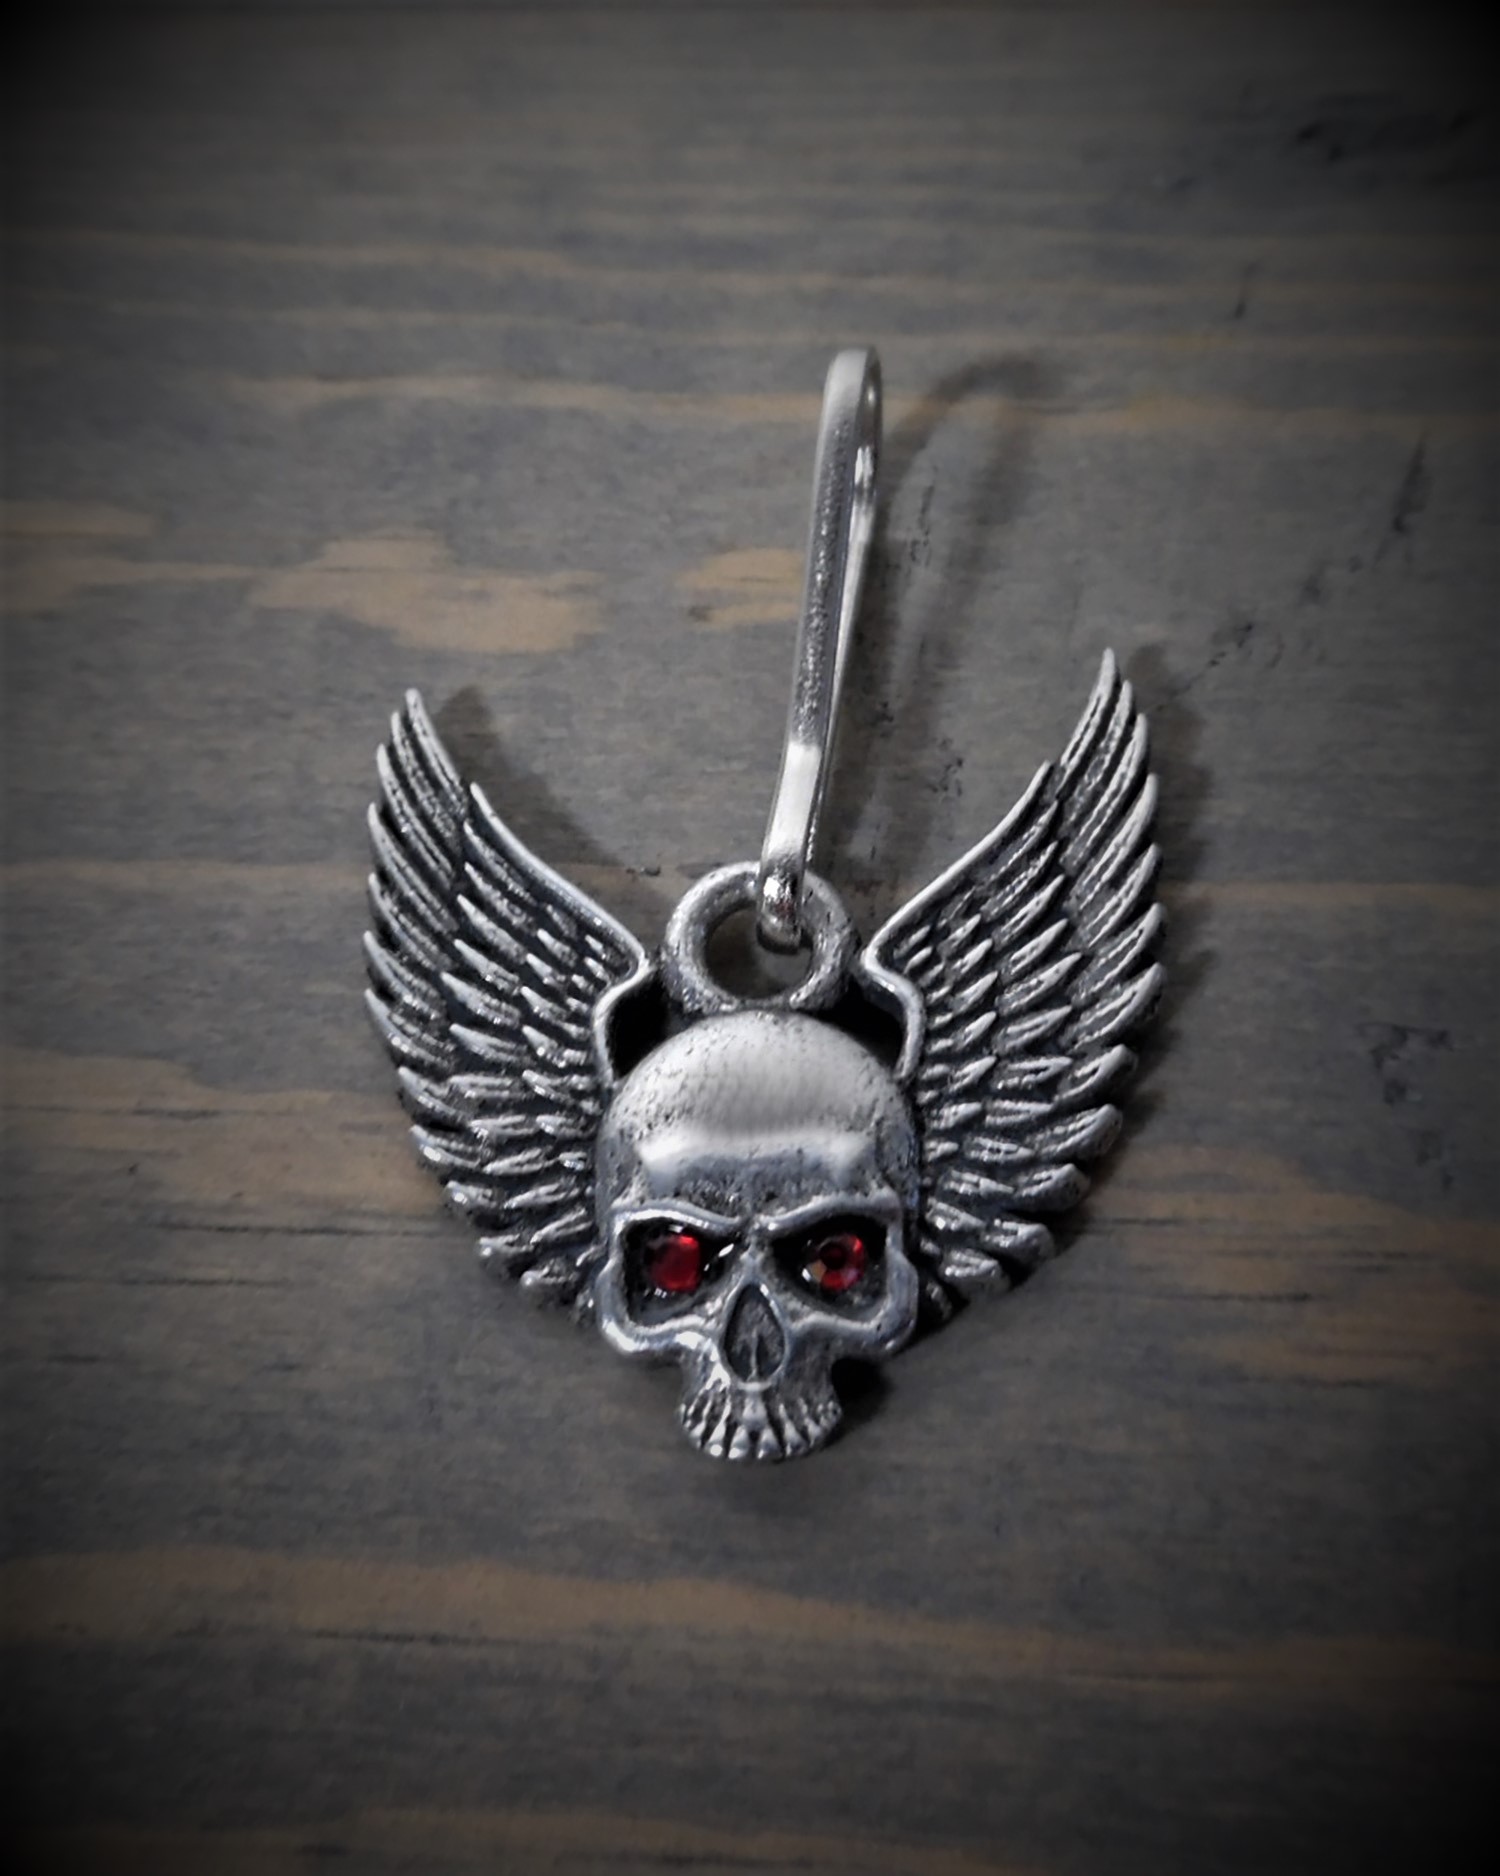 Zipper Pull, Skull Zipper Pull,Zipper Pull Charm, Zipper Pulls for Purses,  Skull Charm, Key Chain,Zipper Pull, Perfect for Necklaces, Bracelets